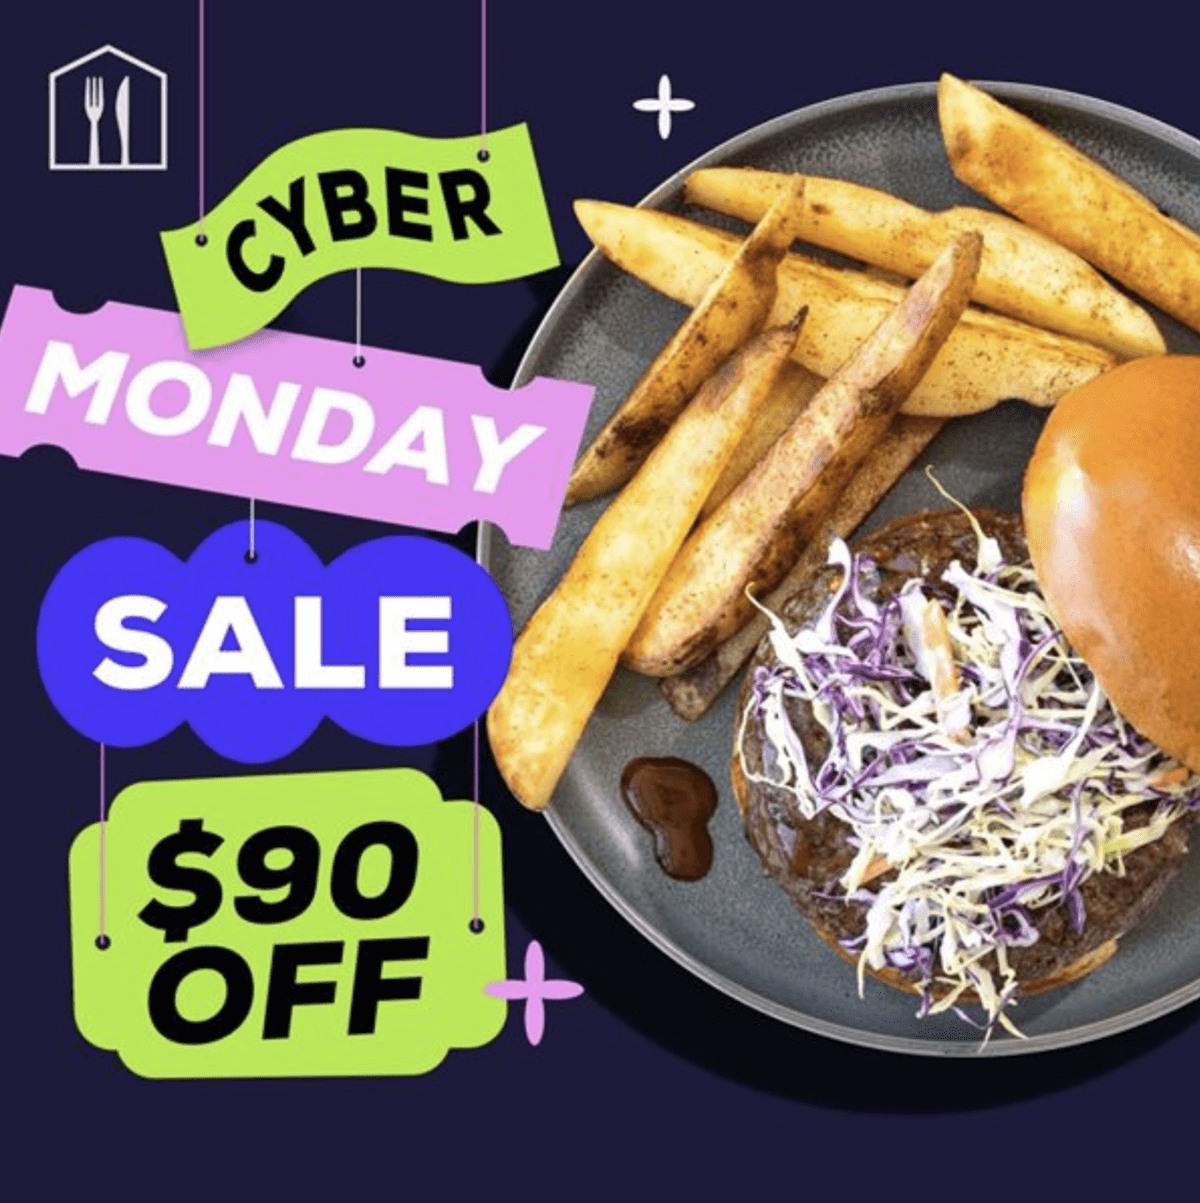 Home Chef Cyber Monday Sale – Save $90